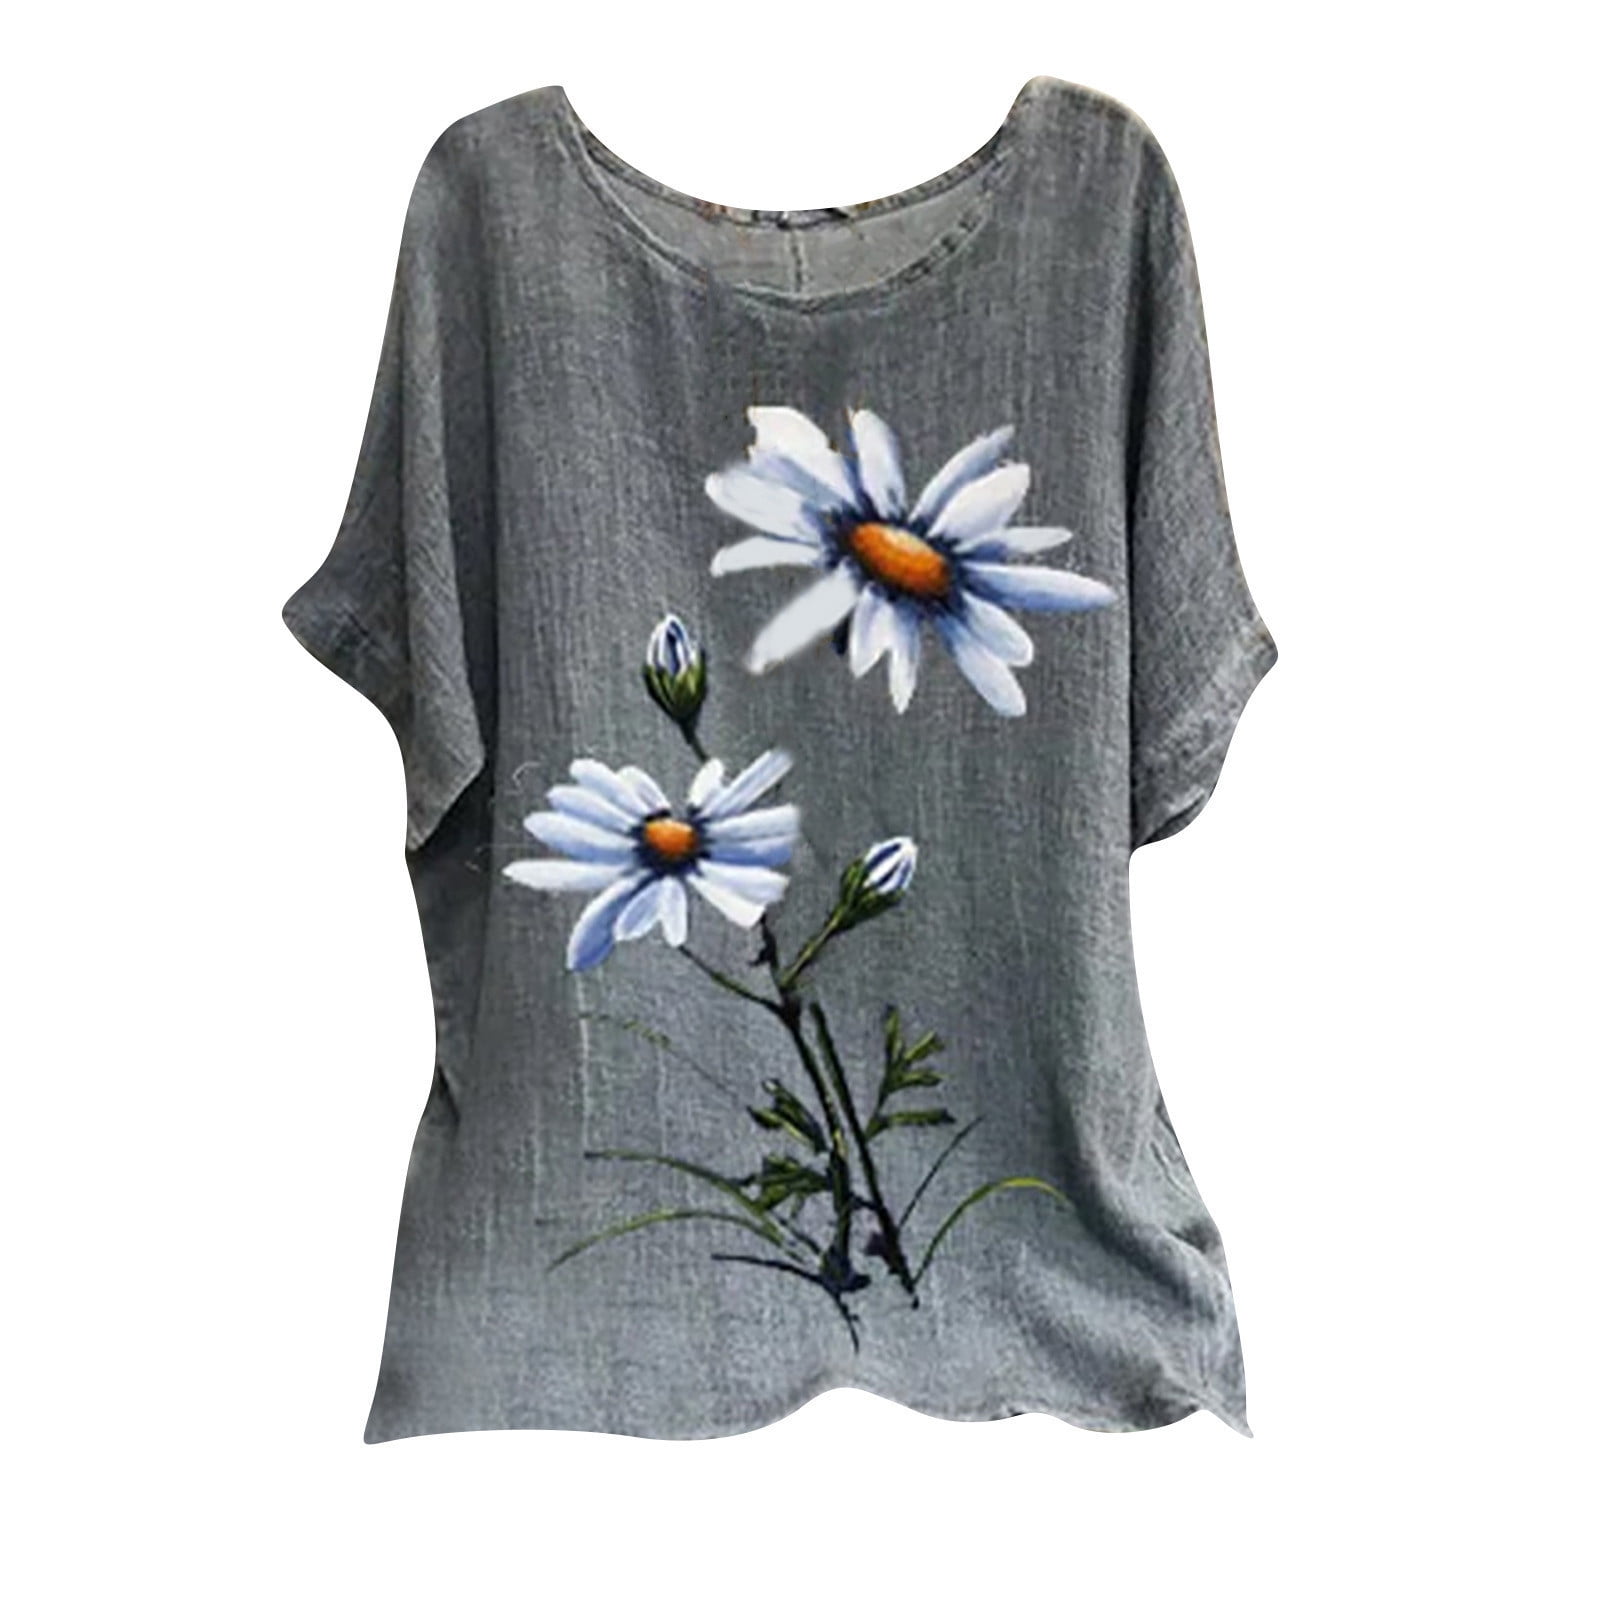 Vintage Flower Pattern Shirts for Women Fashion Round Neck Shirt Casual Short Sleeve T-Shirt Top Blouses L